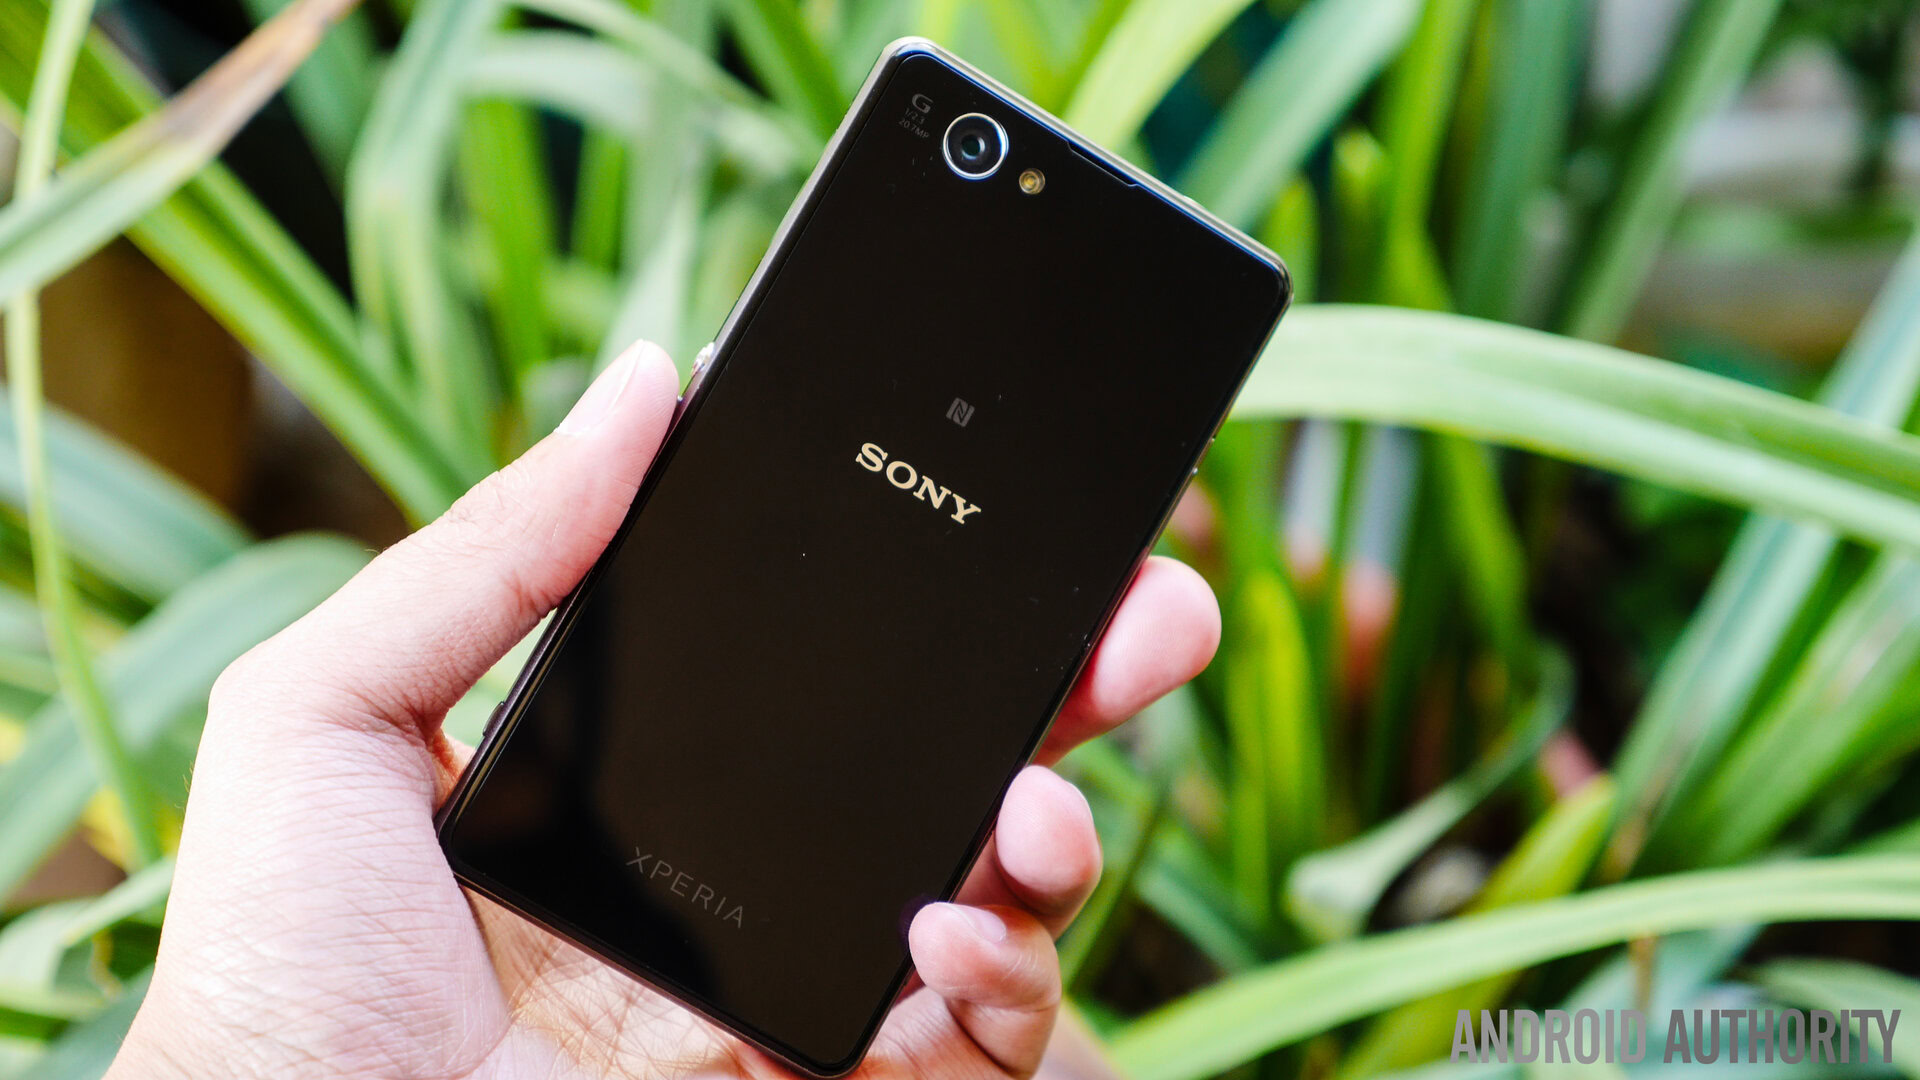 Sony Xperia Z1 Compact Authority